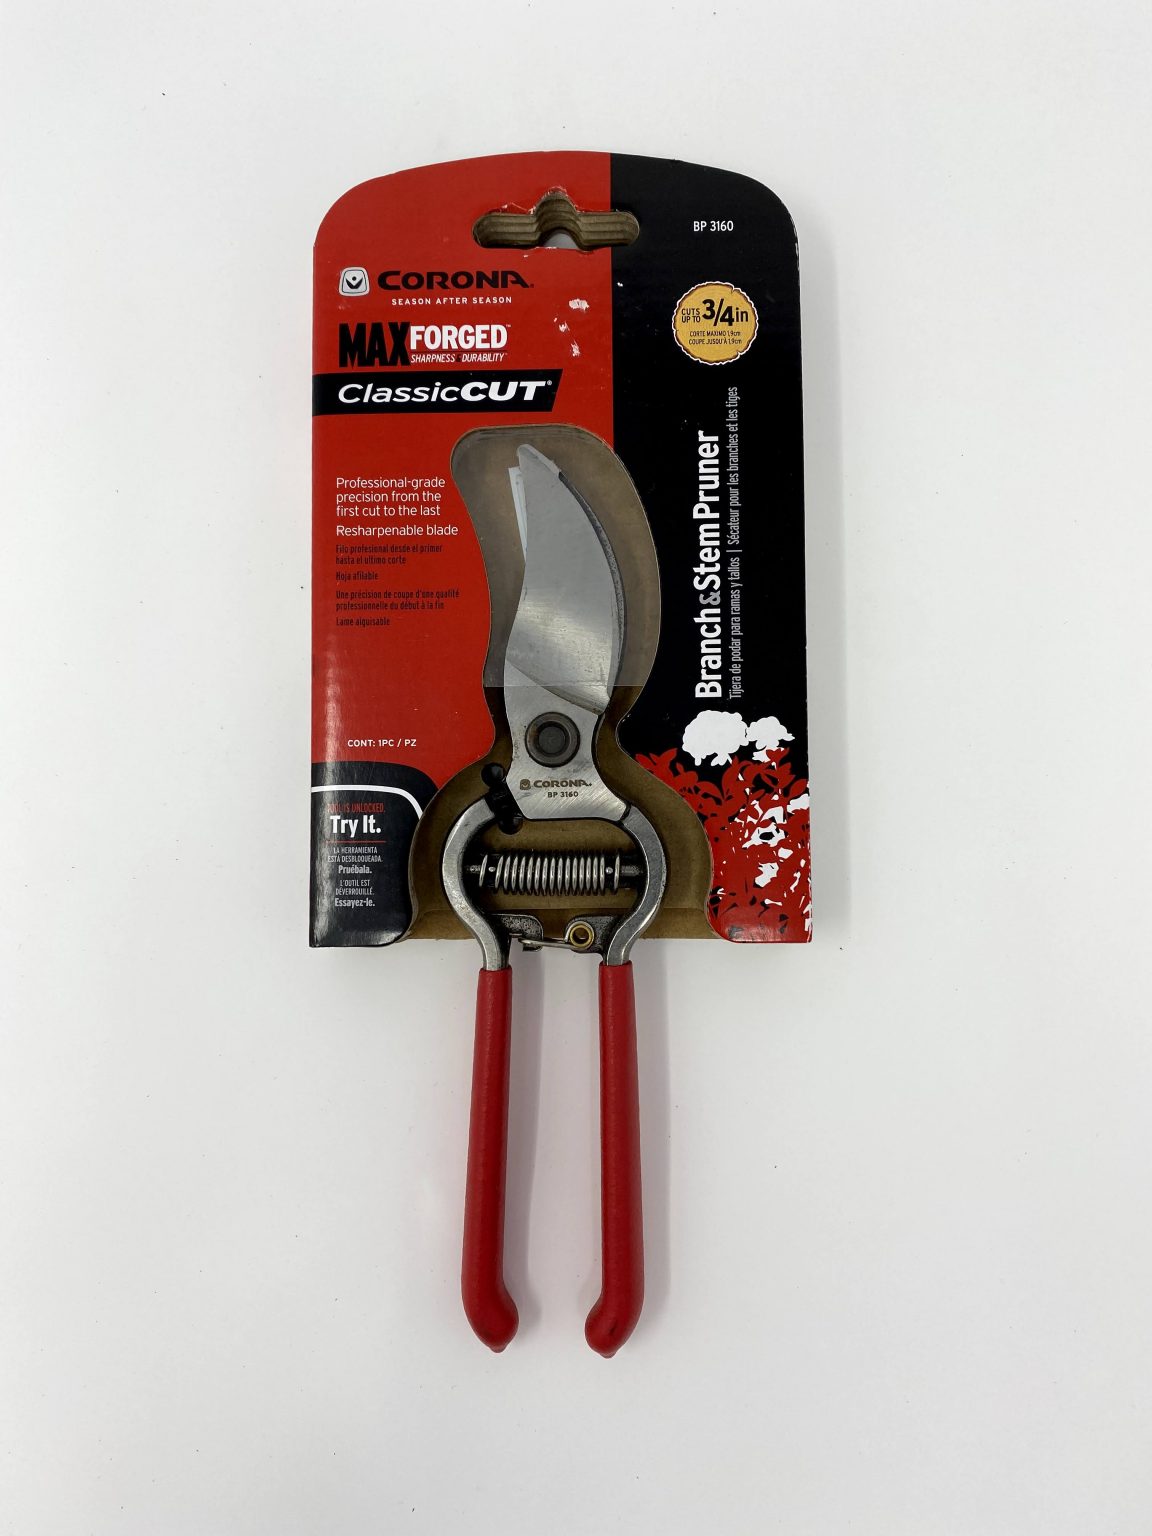 Corona Classic Cut Bypass Pruner with package design